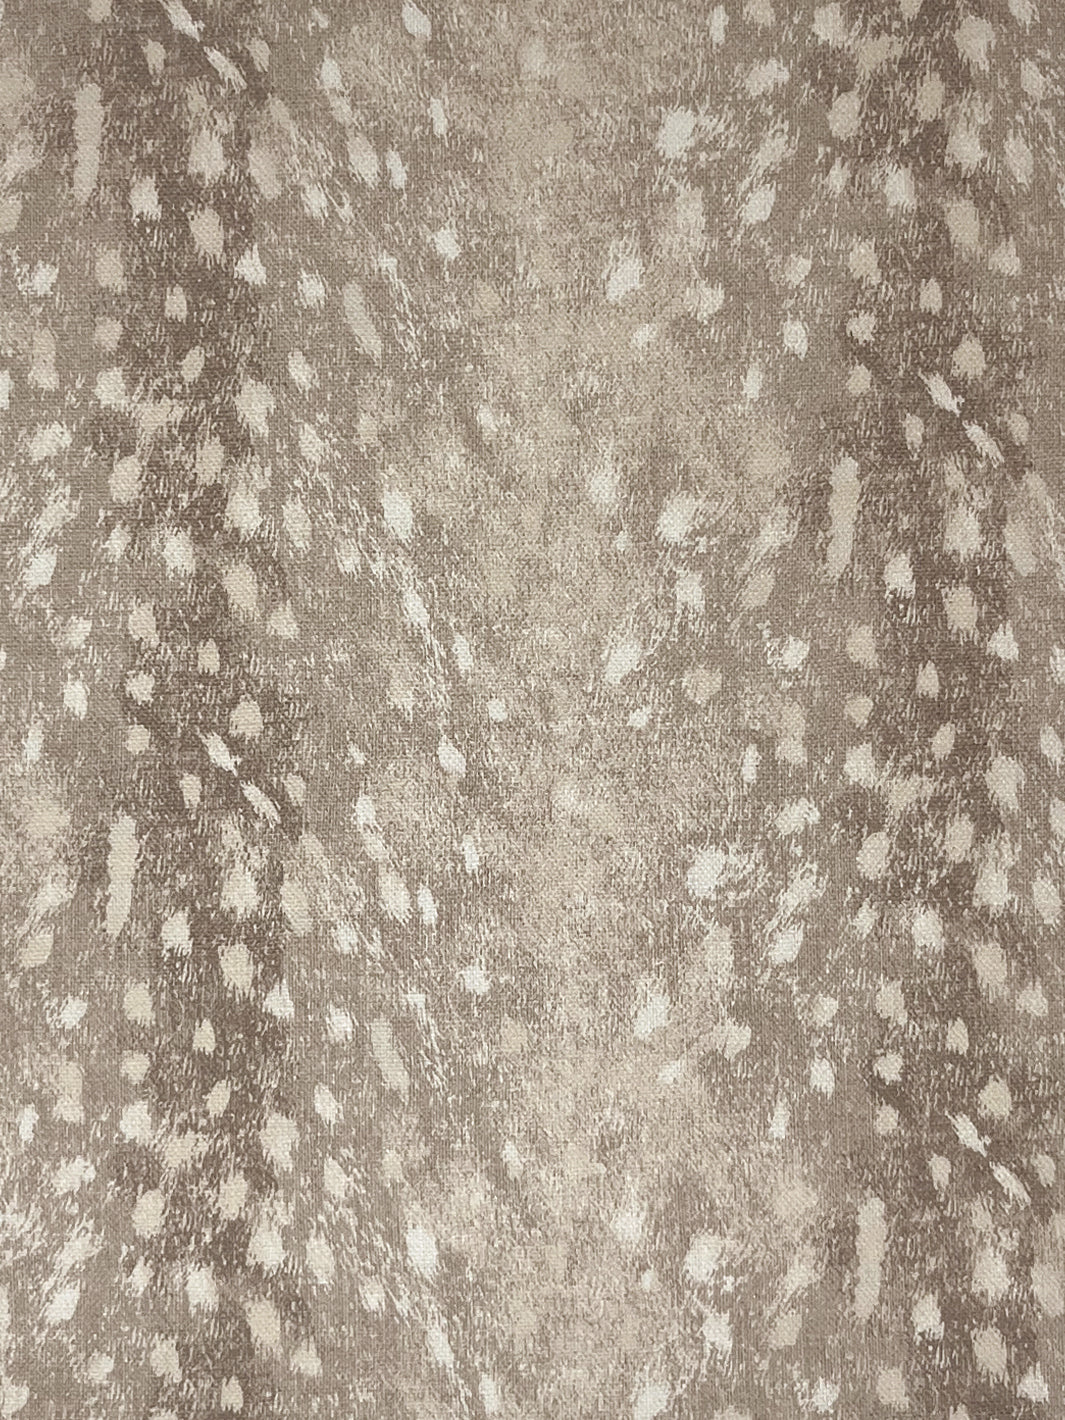 'Deer' Linen Fabric by Nathan Turner - Neutral